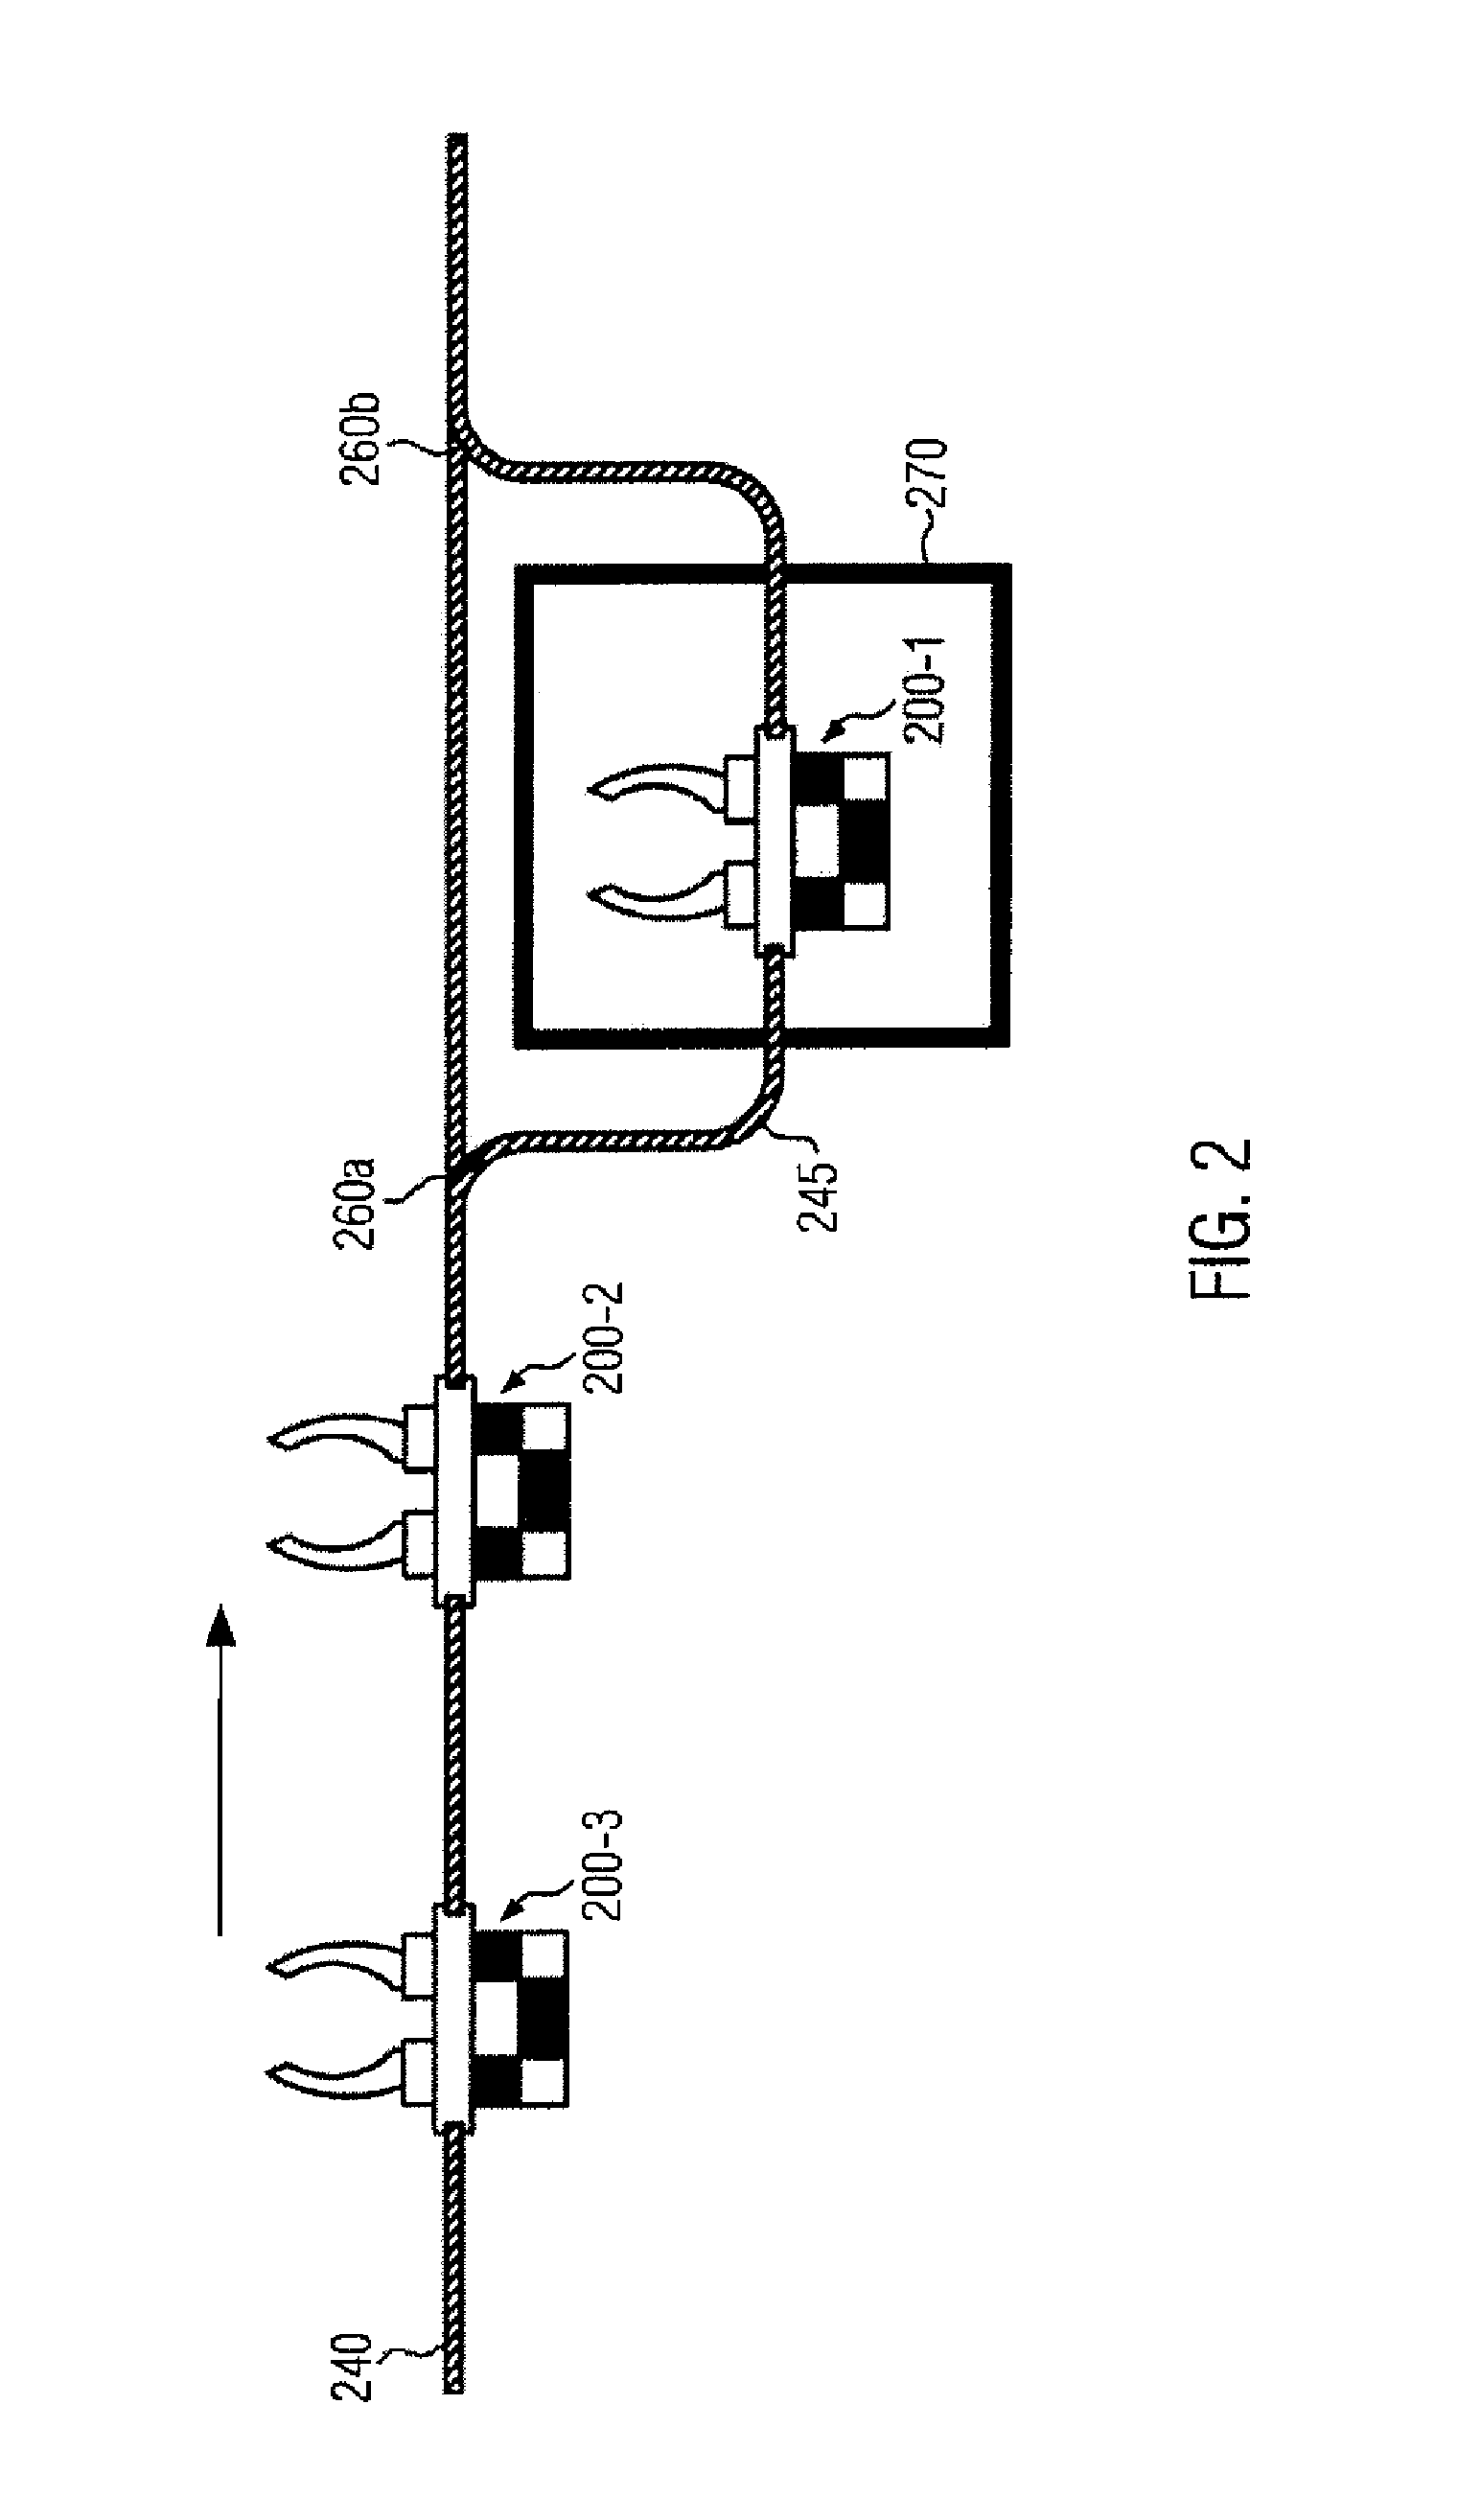 Apparatus and method for servicing conveyor elements in a container treatment system